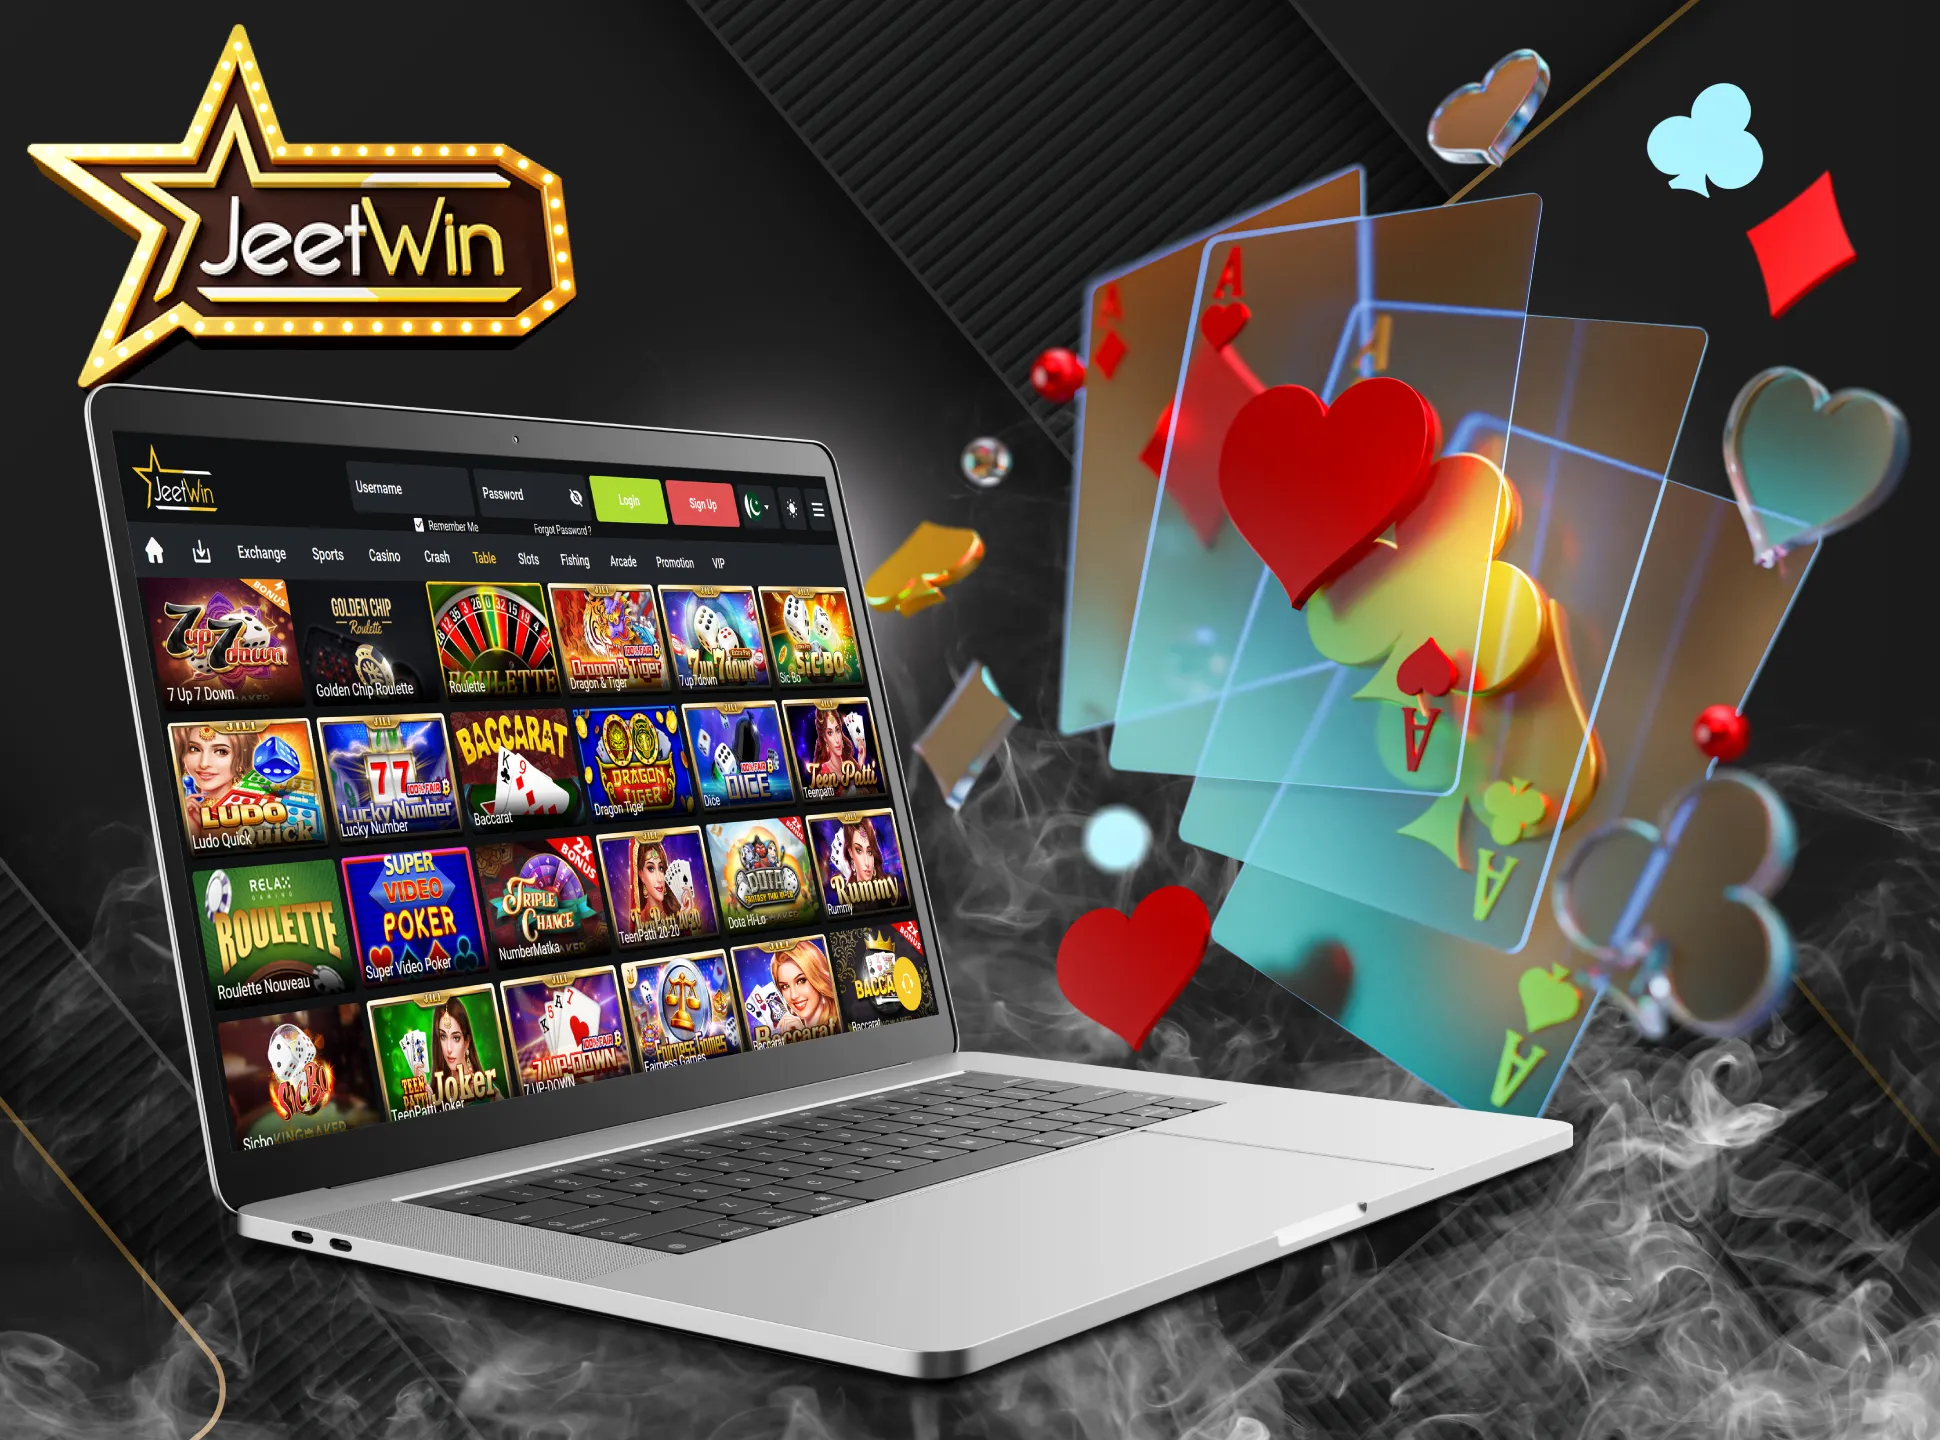 Discover the most popular board games on JeetWin.